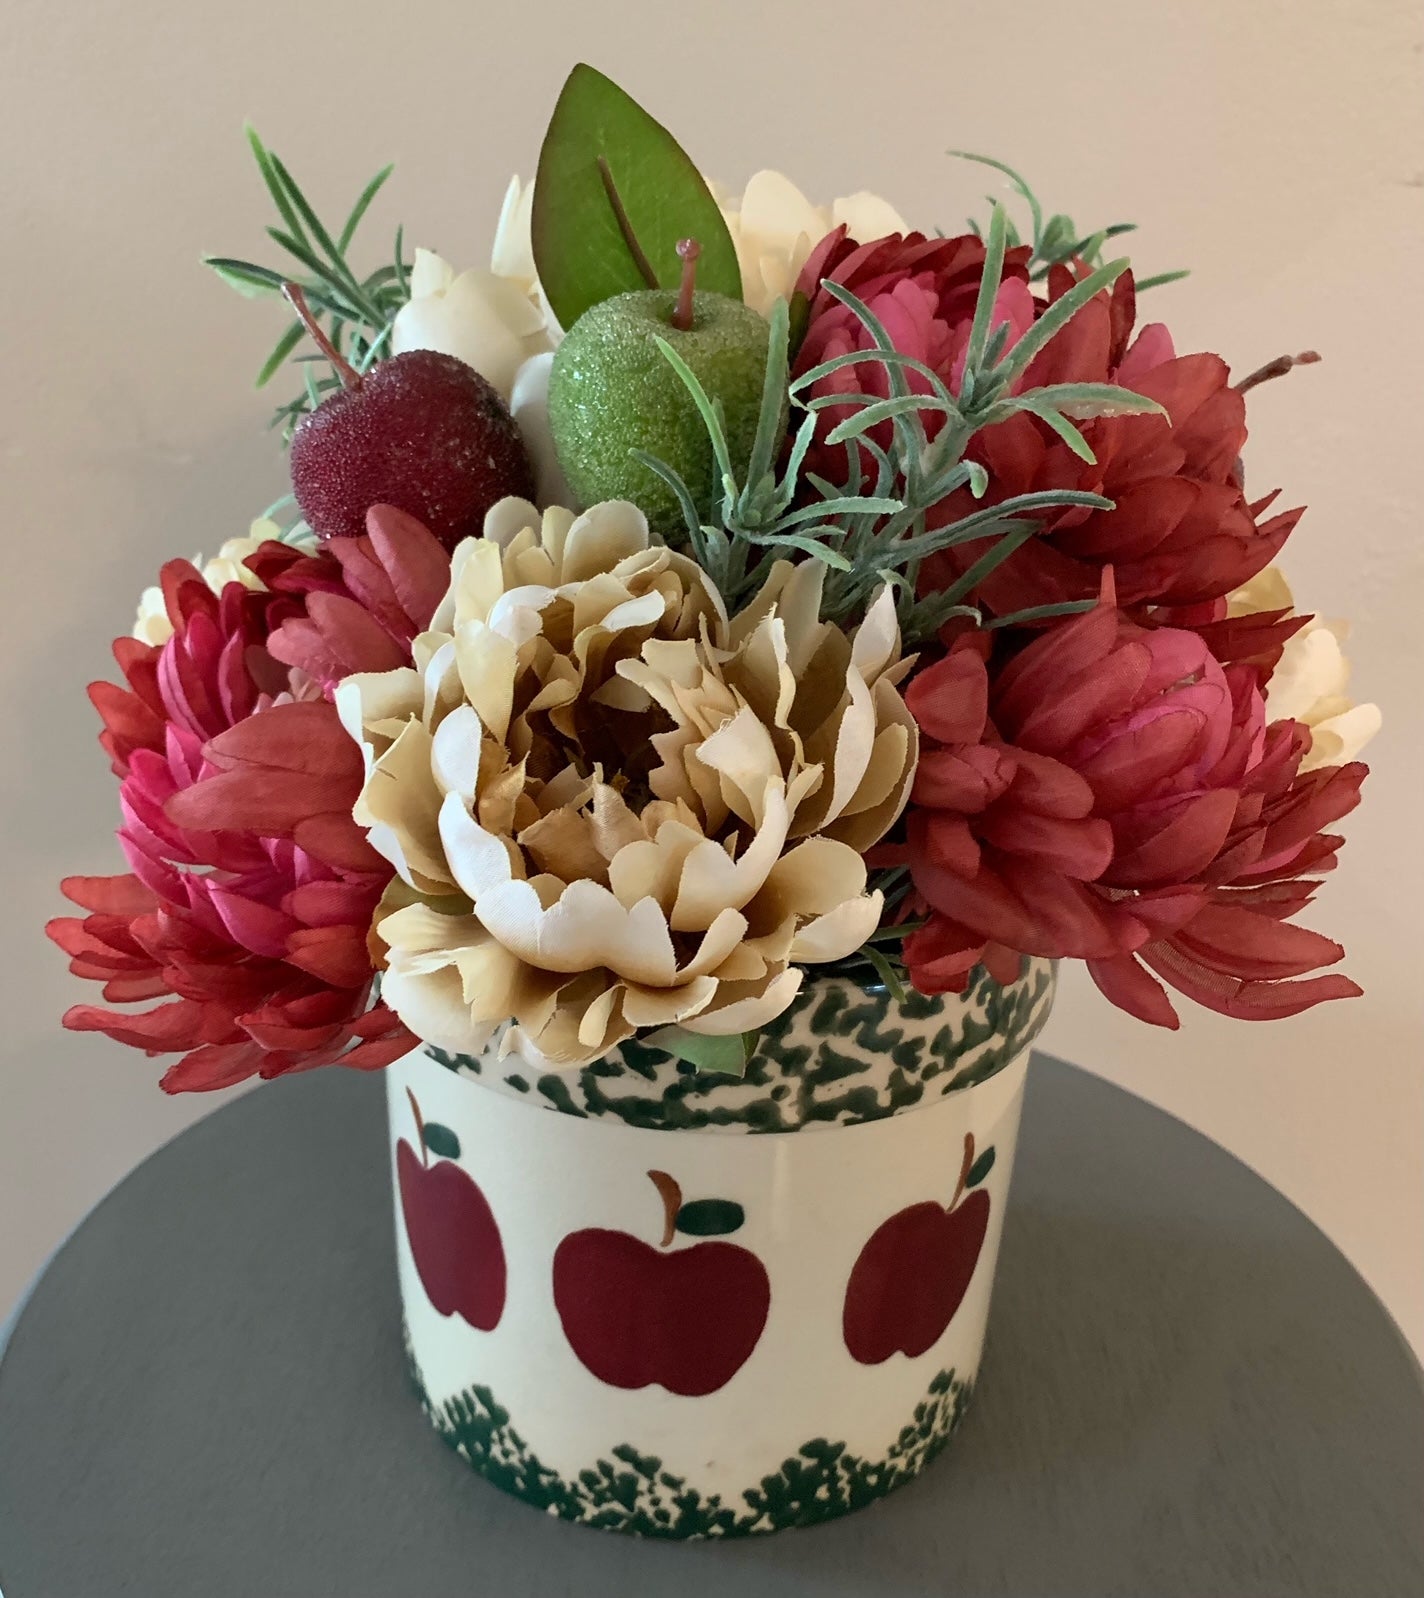 Handmade Centerpieces by Kiki's Kreations